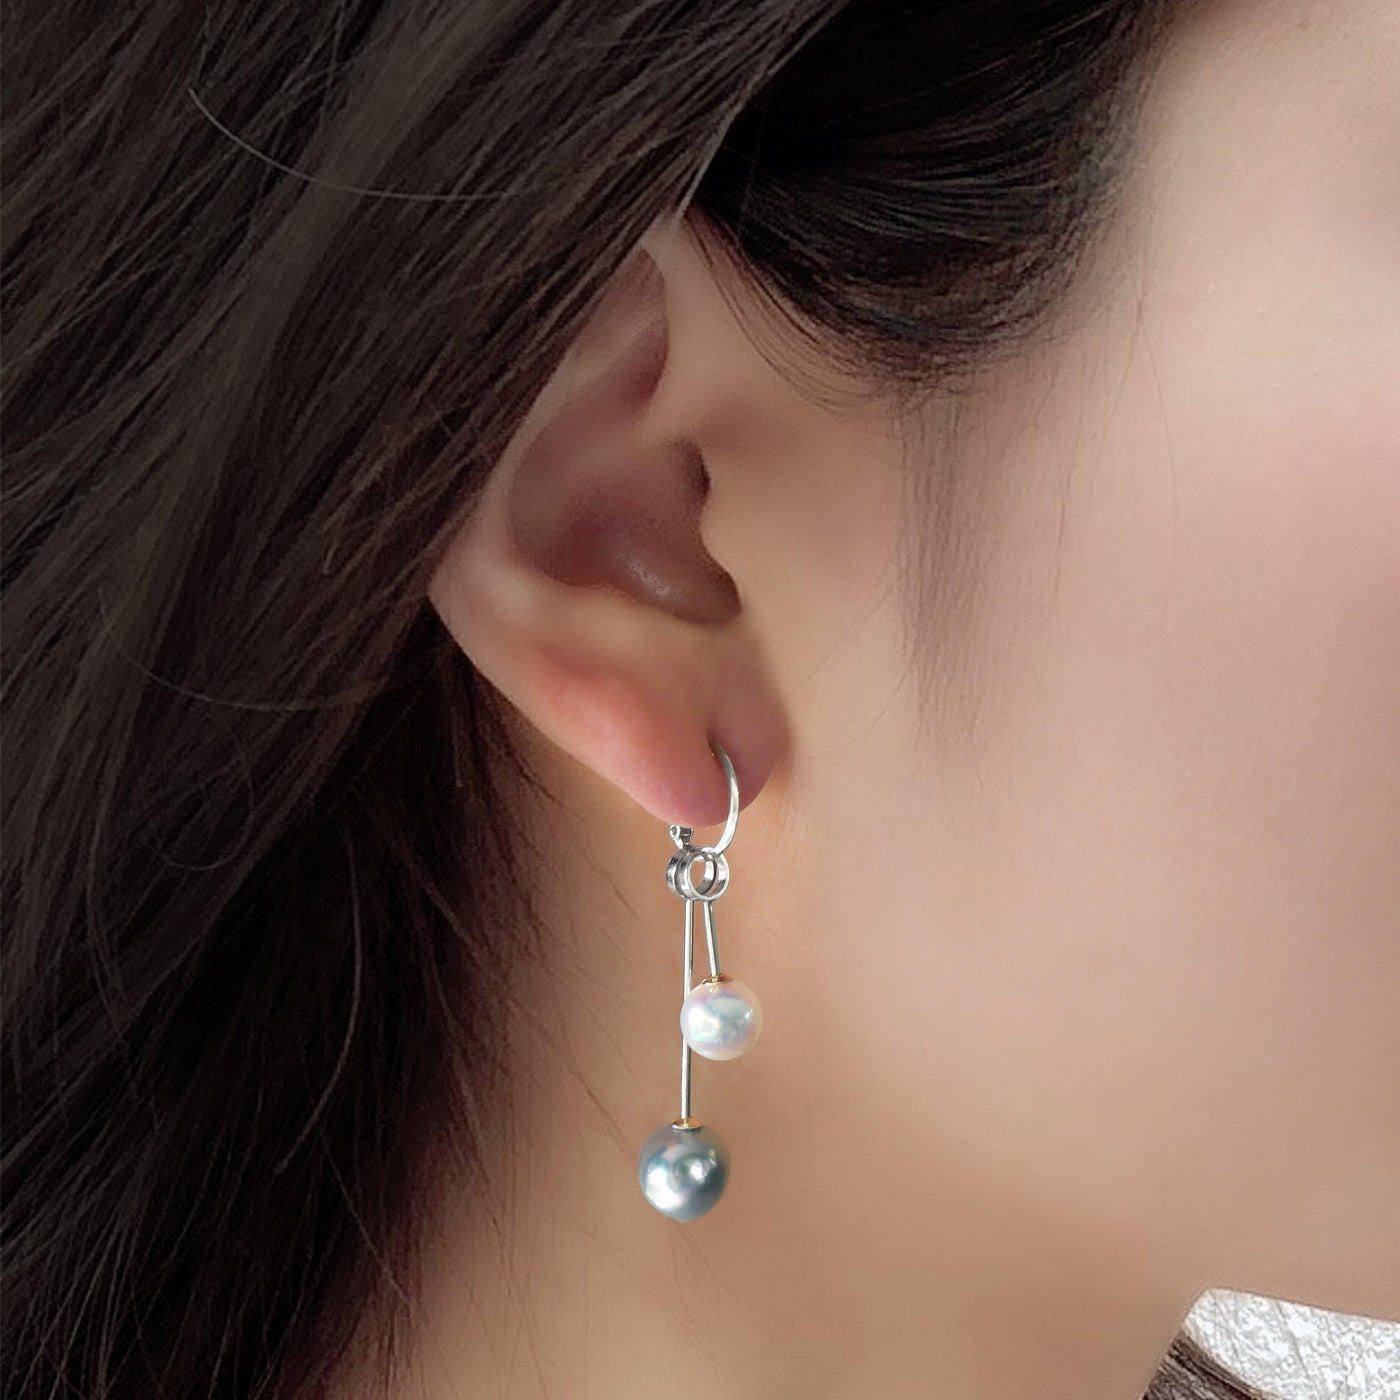 【BASE PARTS】Pt900 Long Stick Charm Clip-On Earring